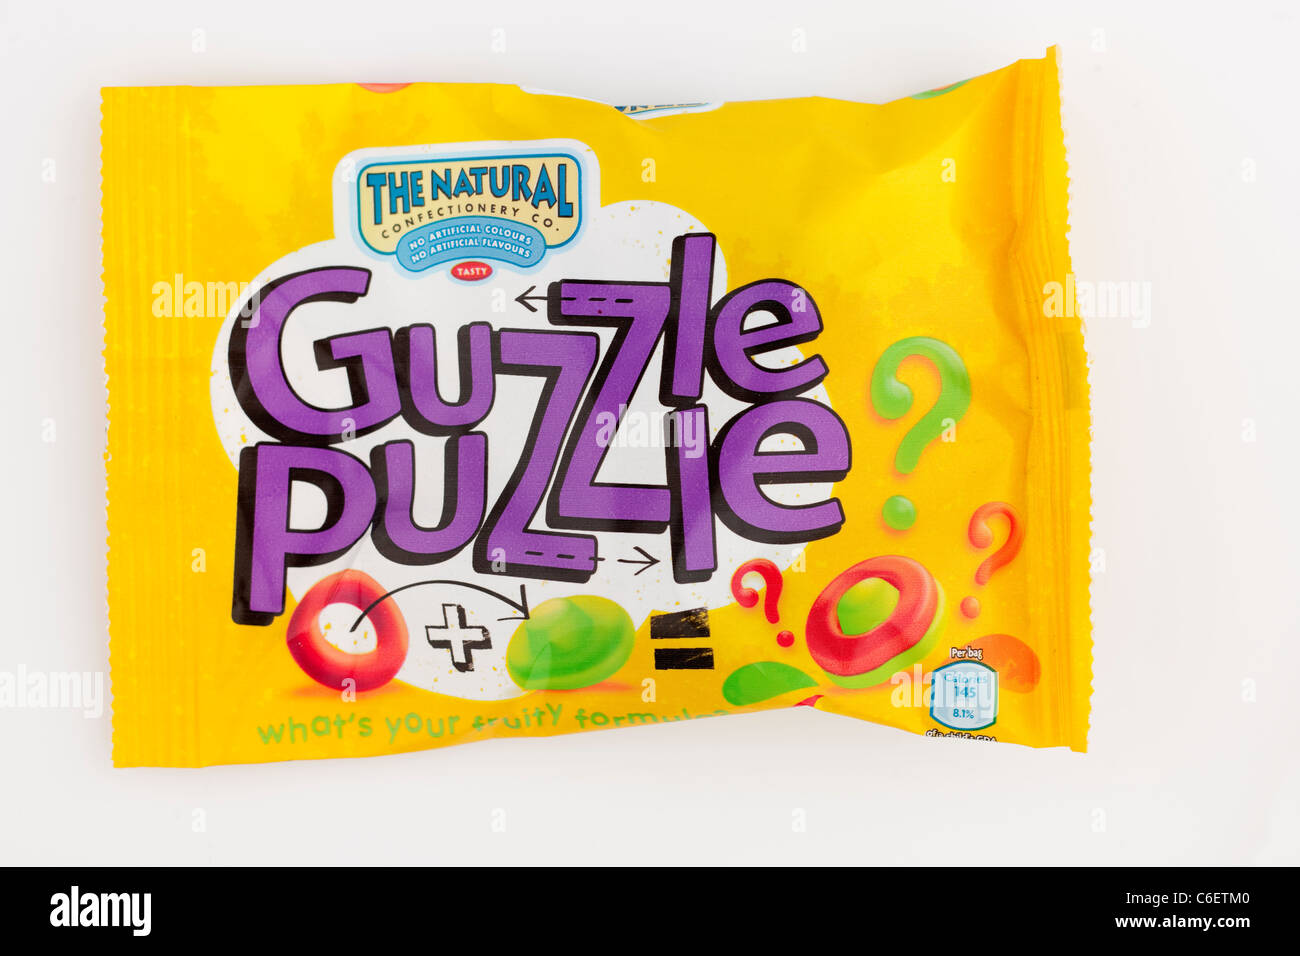 Bag of The Natural confectionery co Guzzle Puzzle childrens chewy gum sweets. Stock Photo